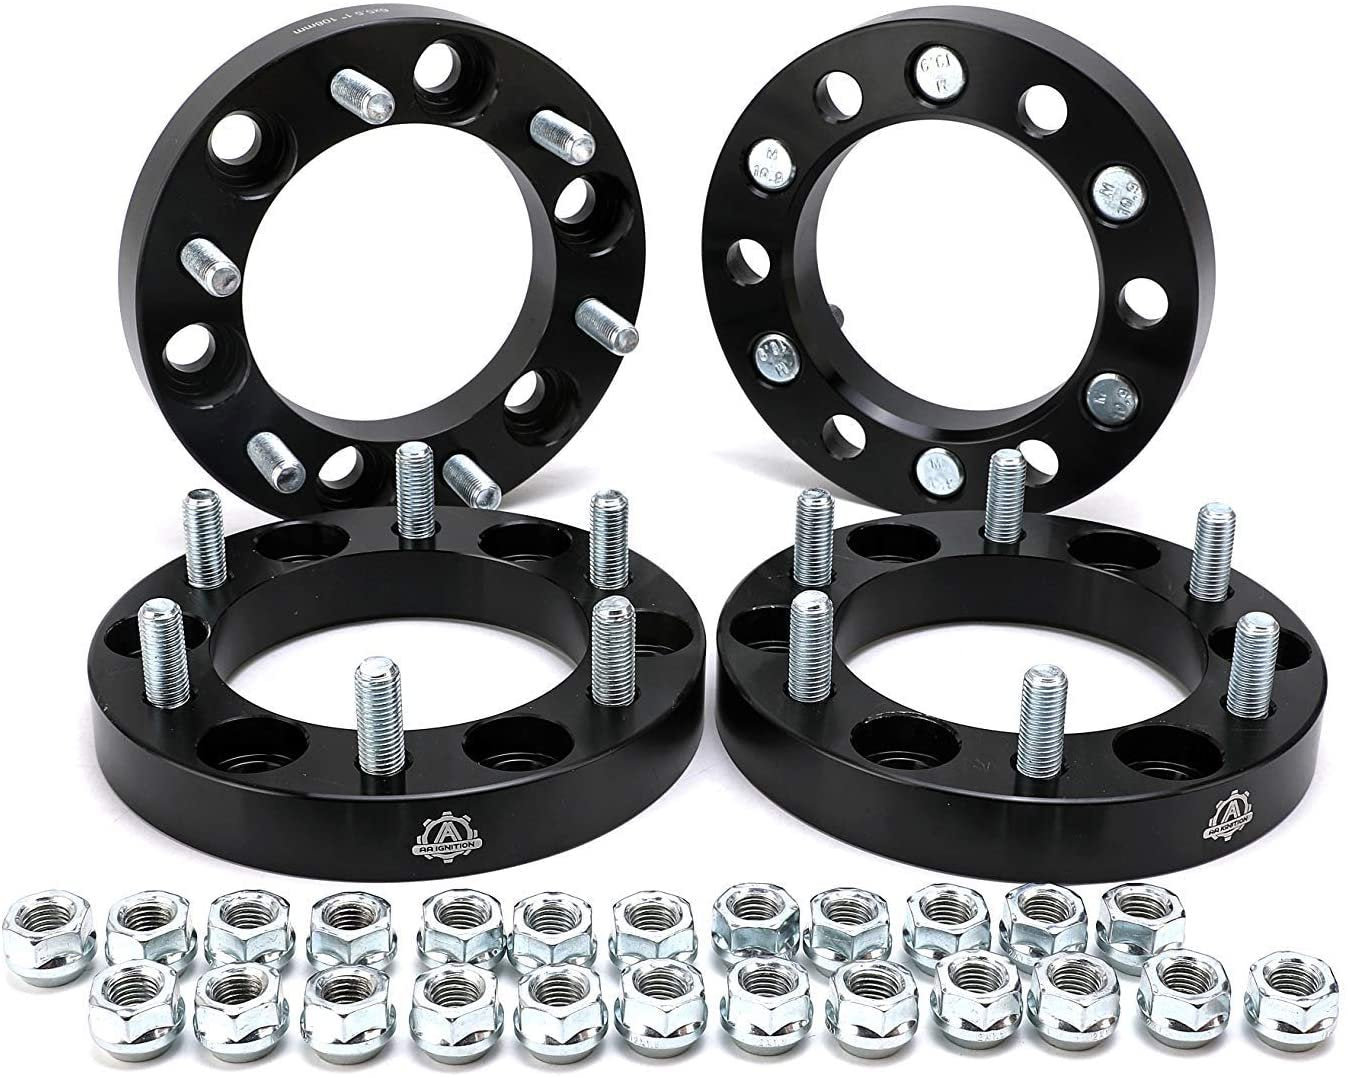 Wheel Spacer Set of 4-6 Lug 1 inch Thick 25mm Lug Centric Hub Adapter 6x5.5 - Compatible with Toyota Vehicles - 1996-2018 4Runner, 01-07 Sequoia, 2001-18 Tacoma, Tundra, FJ Cruiser - 6x139.7mm